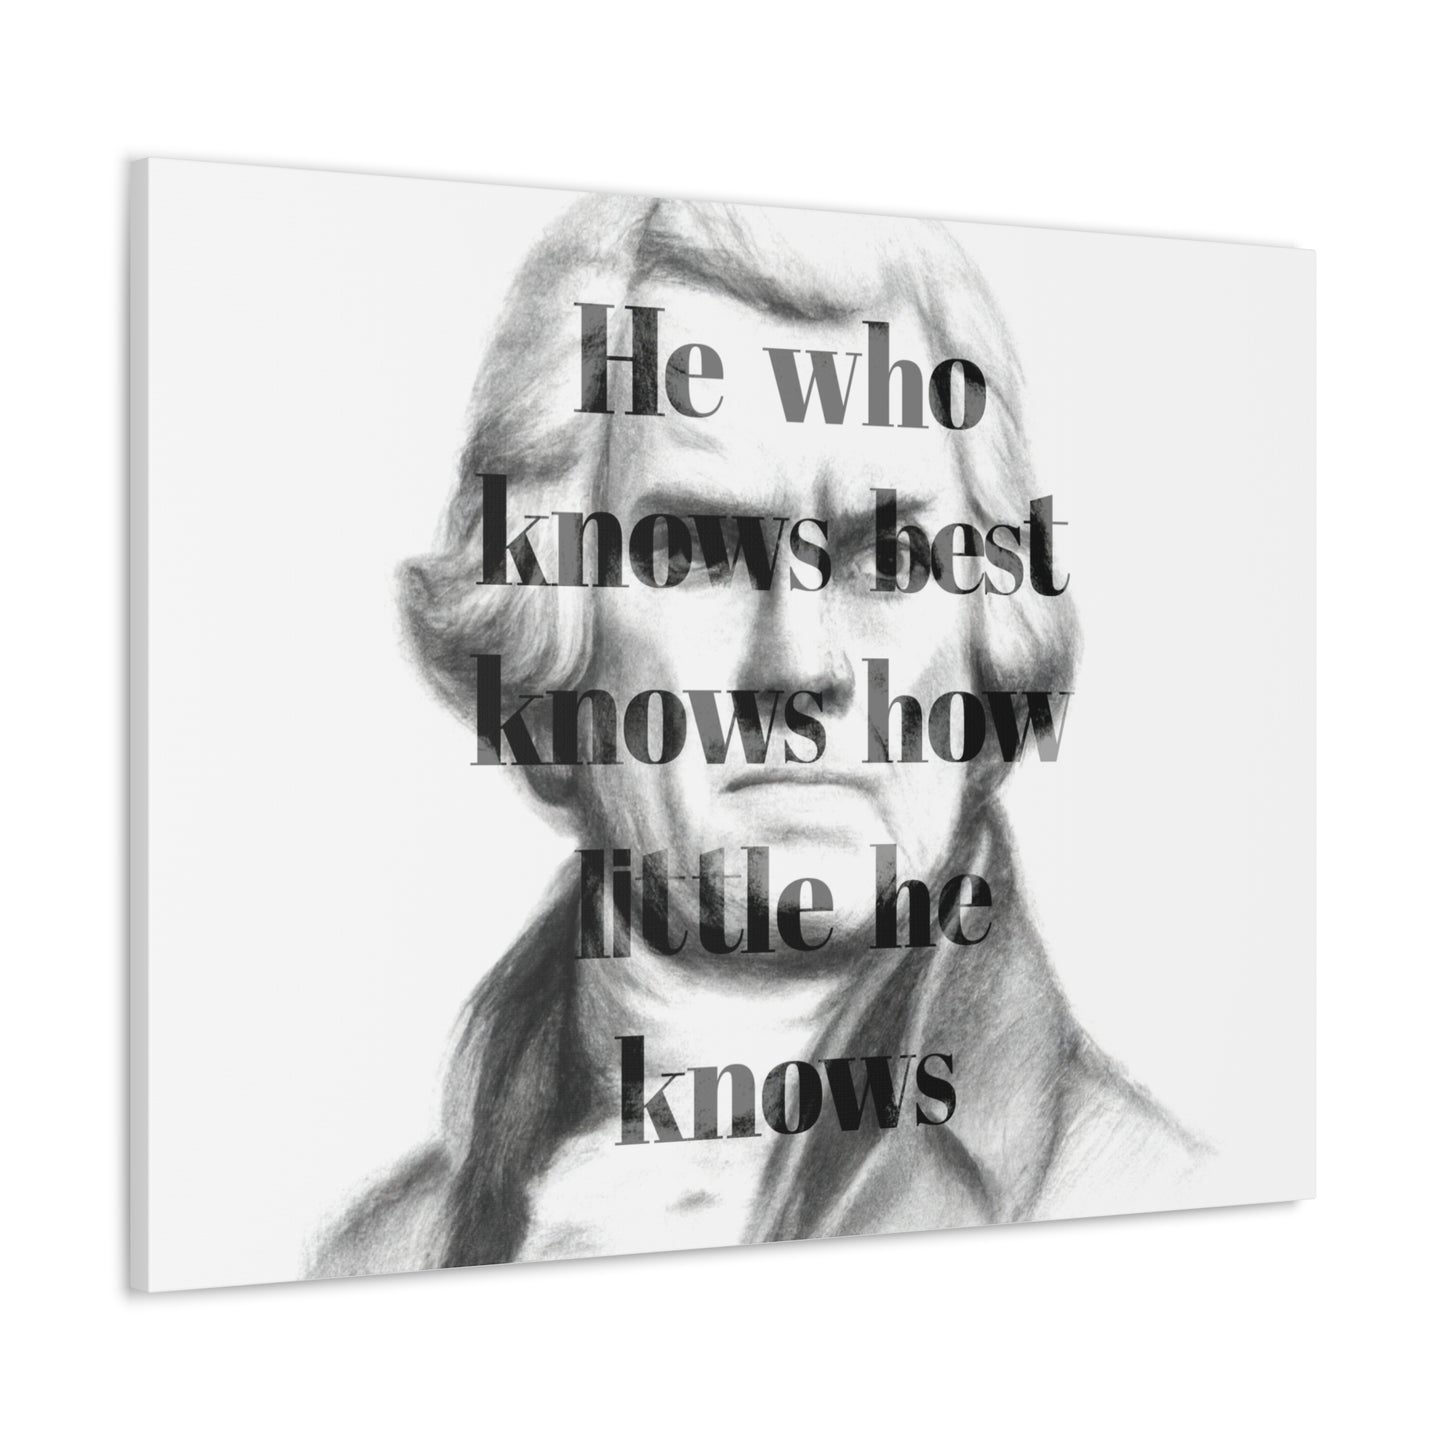 Thomas Jefferson Quote 5, Canvas Art, Horizontal Light Print, 3rd President of the United States, Political Art, Canvas Prints, Presidential Quotes, Inspirational Quotes